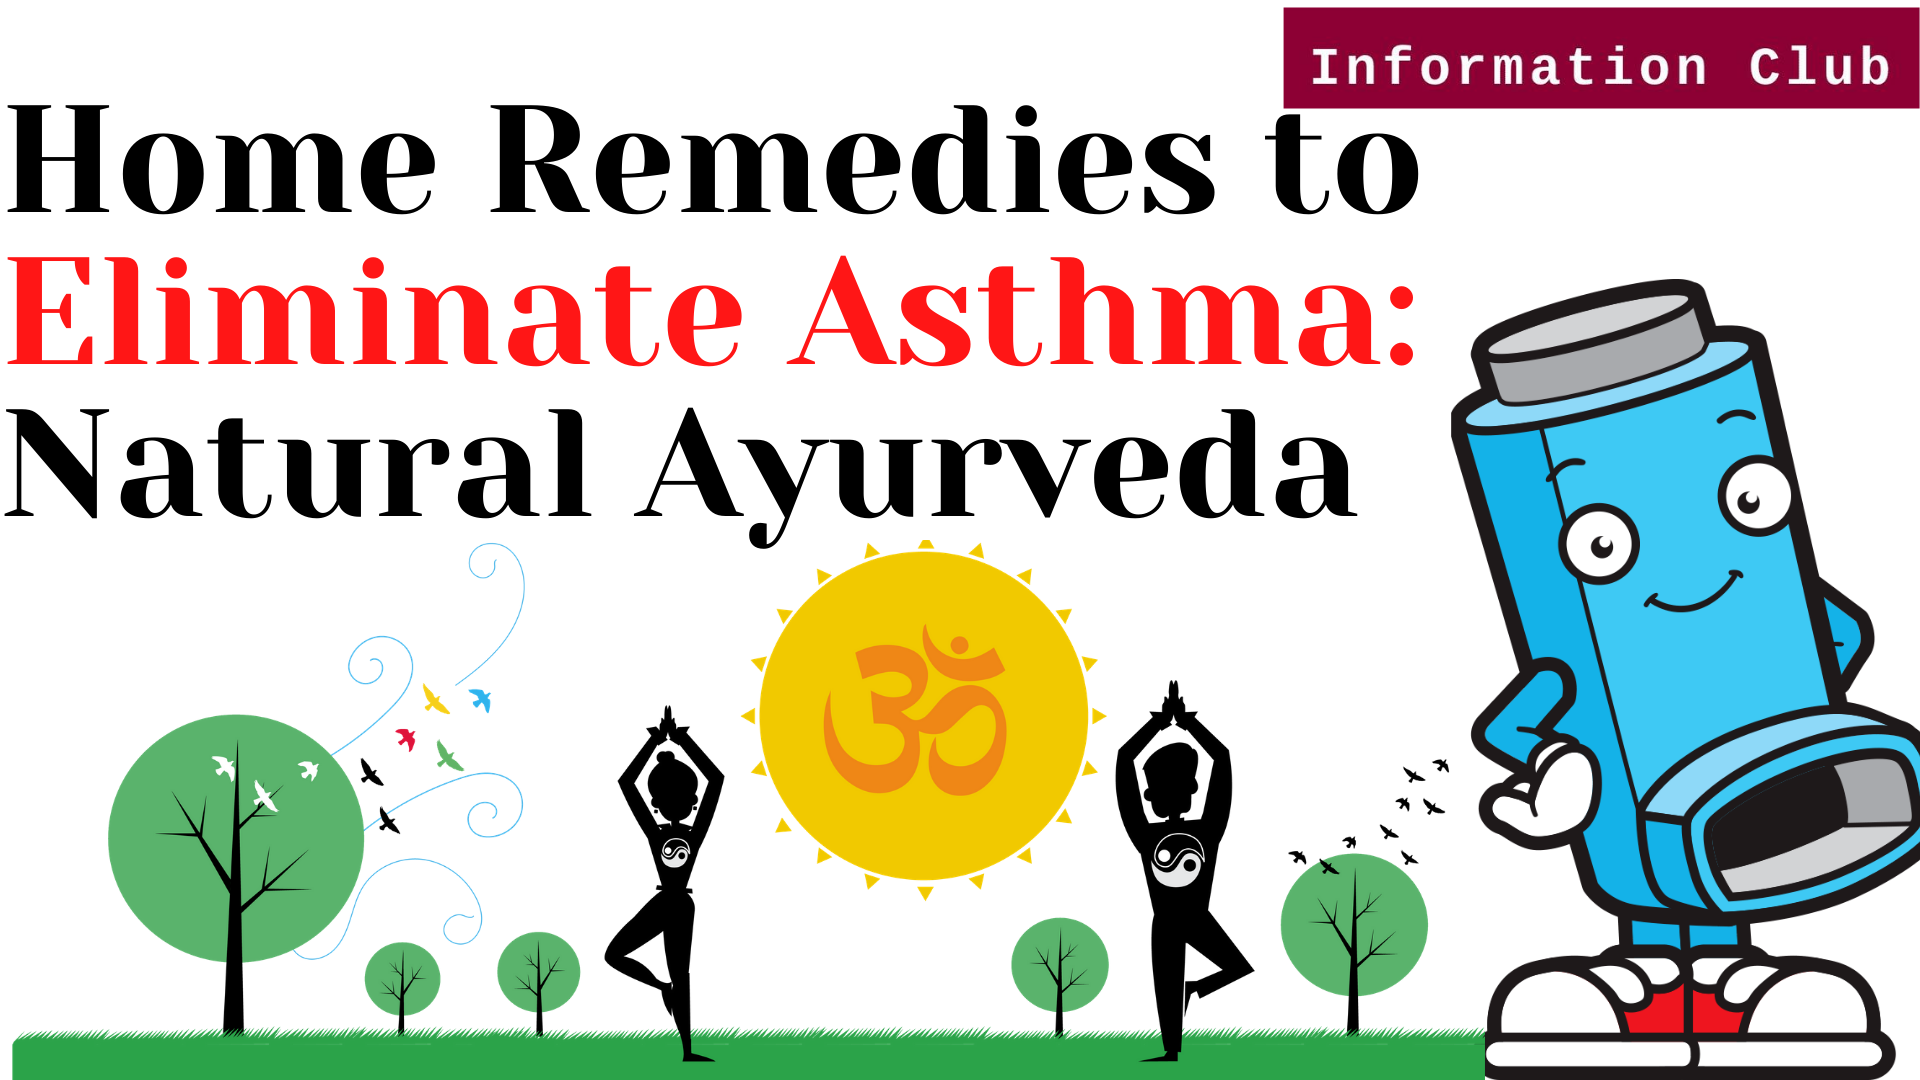 https://www.clubinfonline.com/2020/04/04/home-remedies-for-reducing-or-eliminate-asthma-at-home/